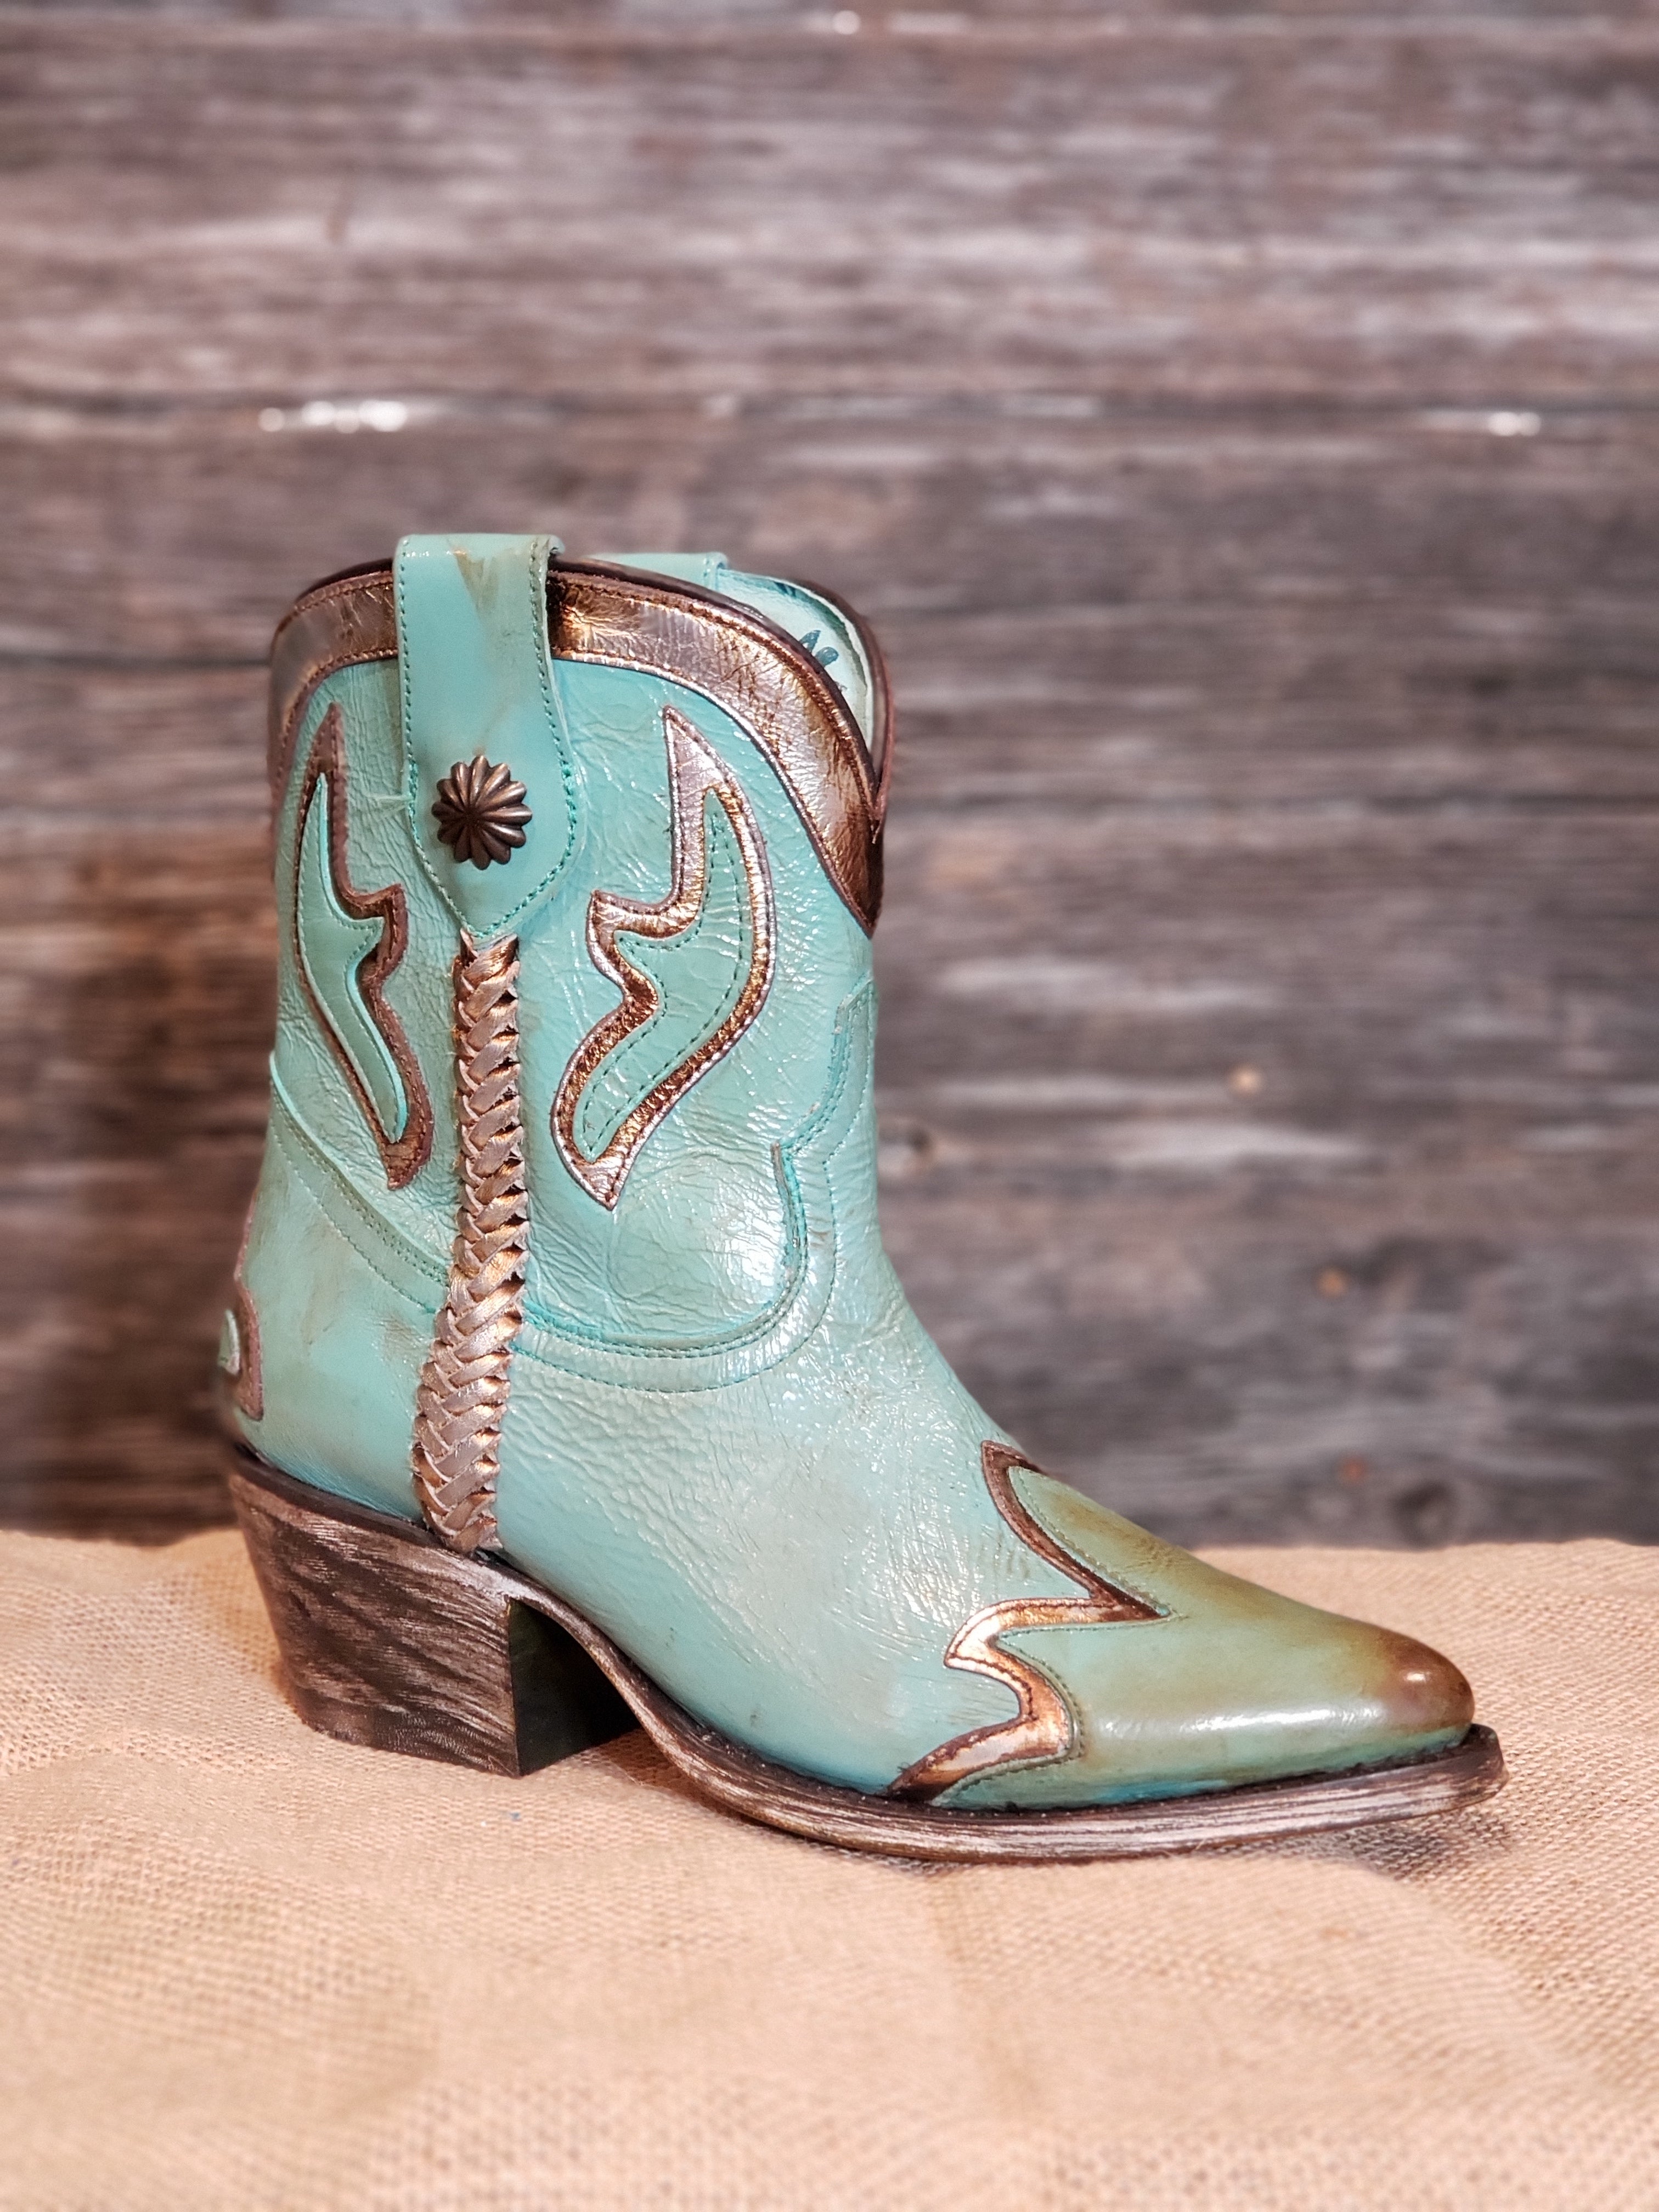 CORRAL LD TURQUOISE/GOLD OVERLAY & WOVEN ANKLE BOOT POINT TOE Z0120